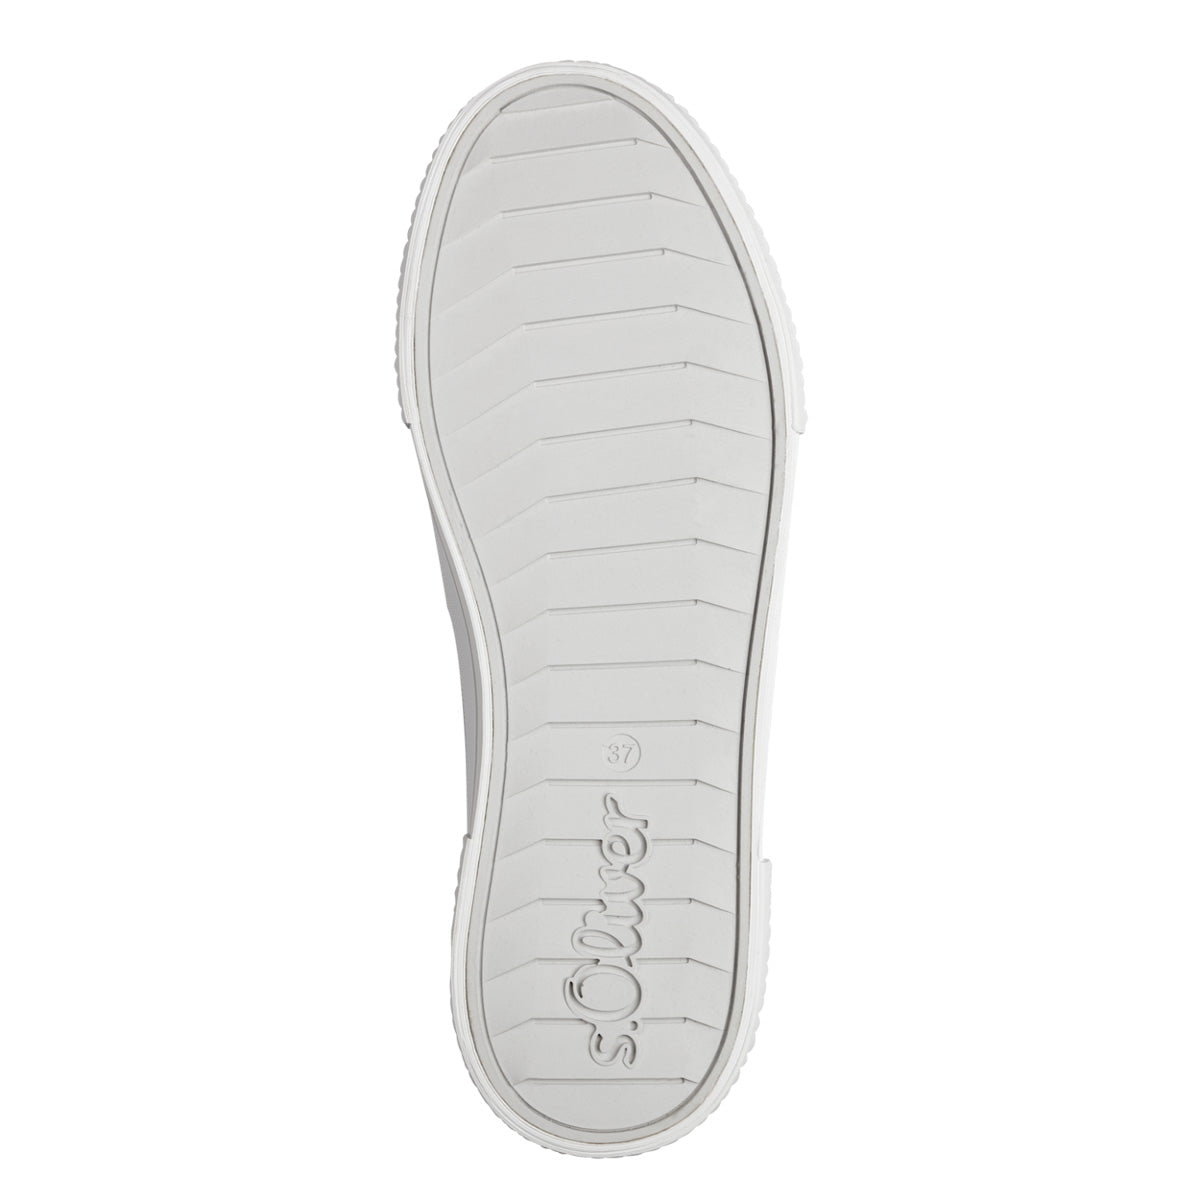 White Canvas Flat Runner Shoes with Elastic Strap and Soft Foam Insole